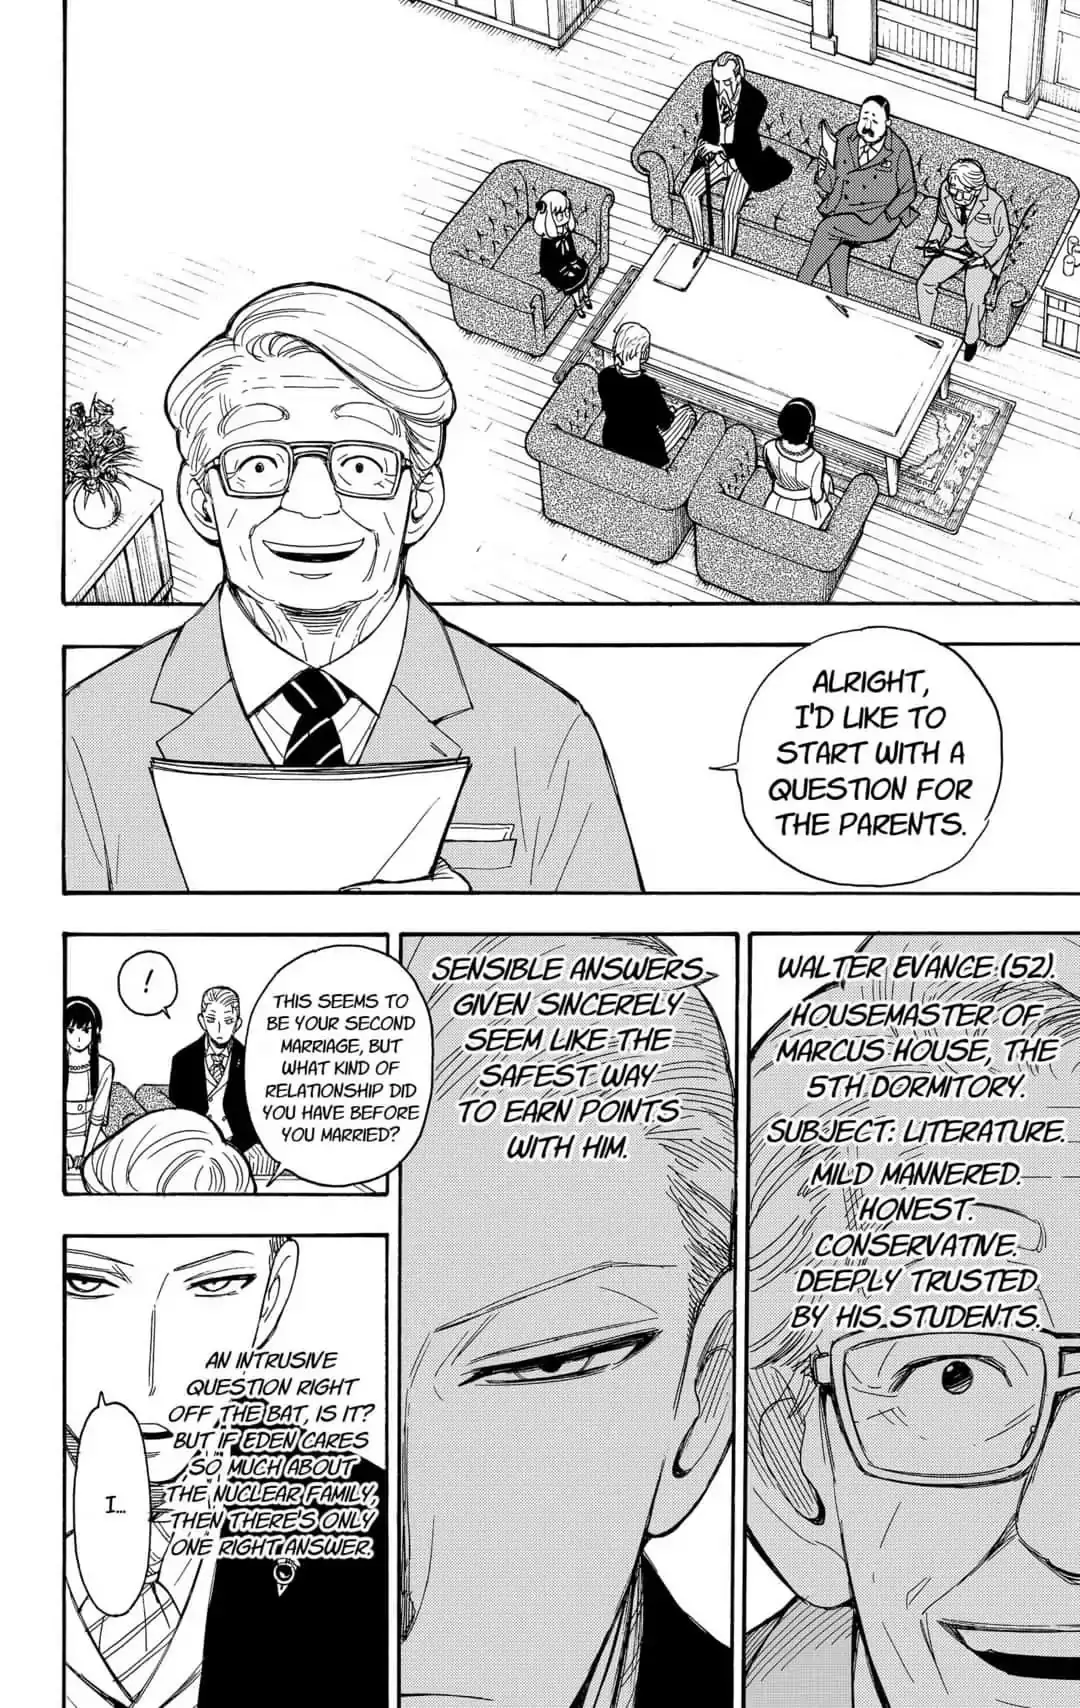 Spy X Family - 5 page 4-74aac7bf